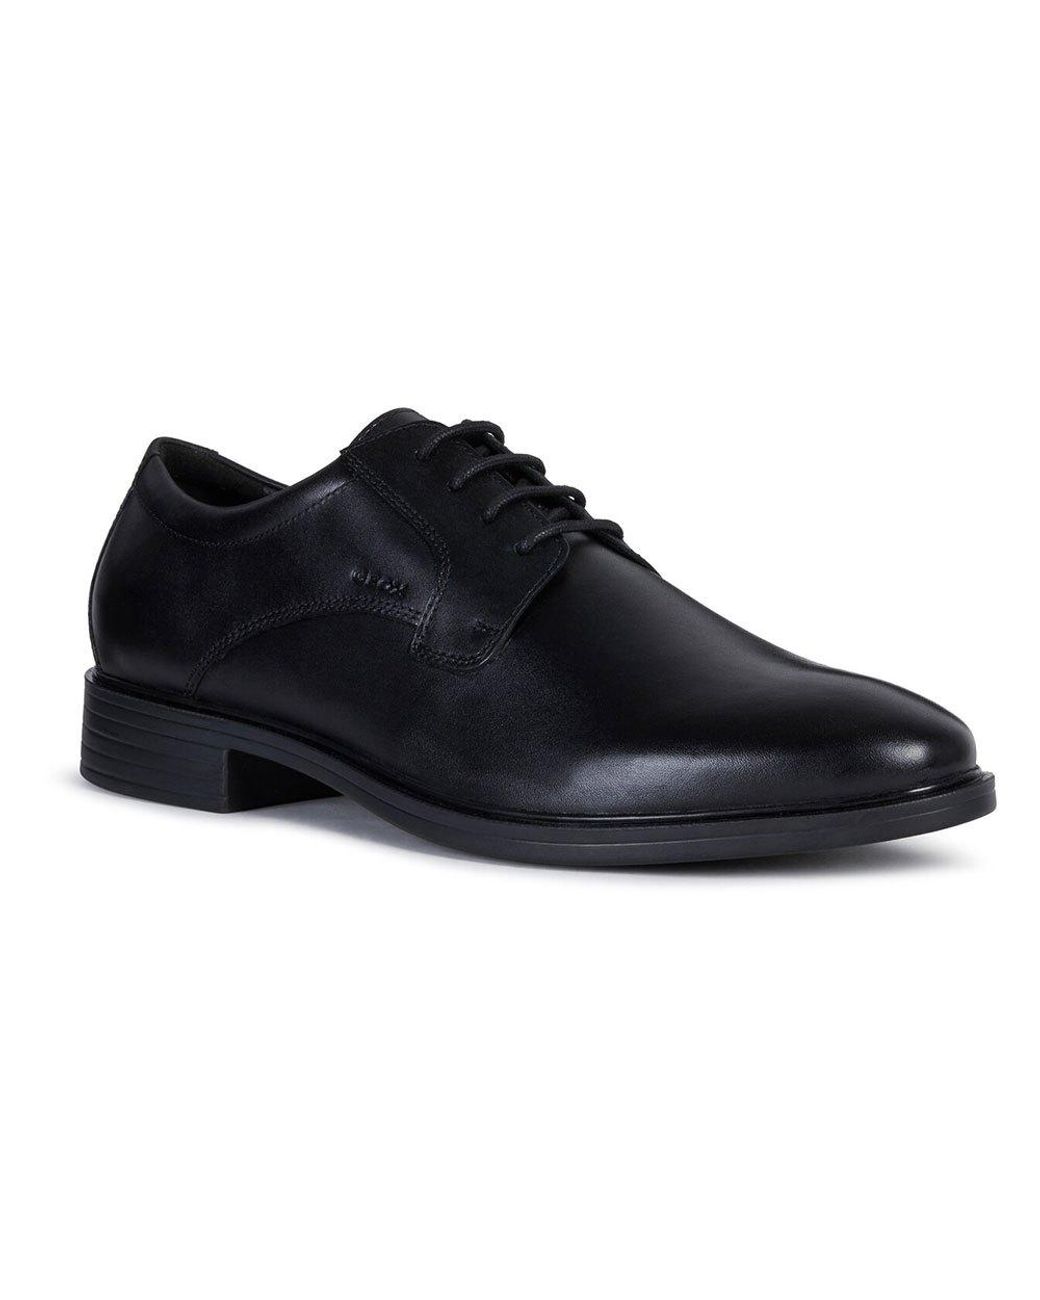 Geox Gladwin Shoes in Black for Men Lyst